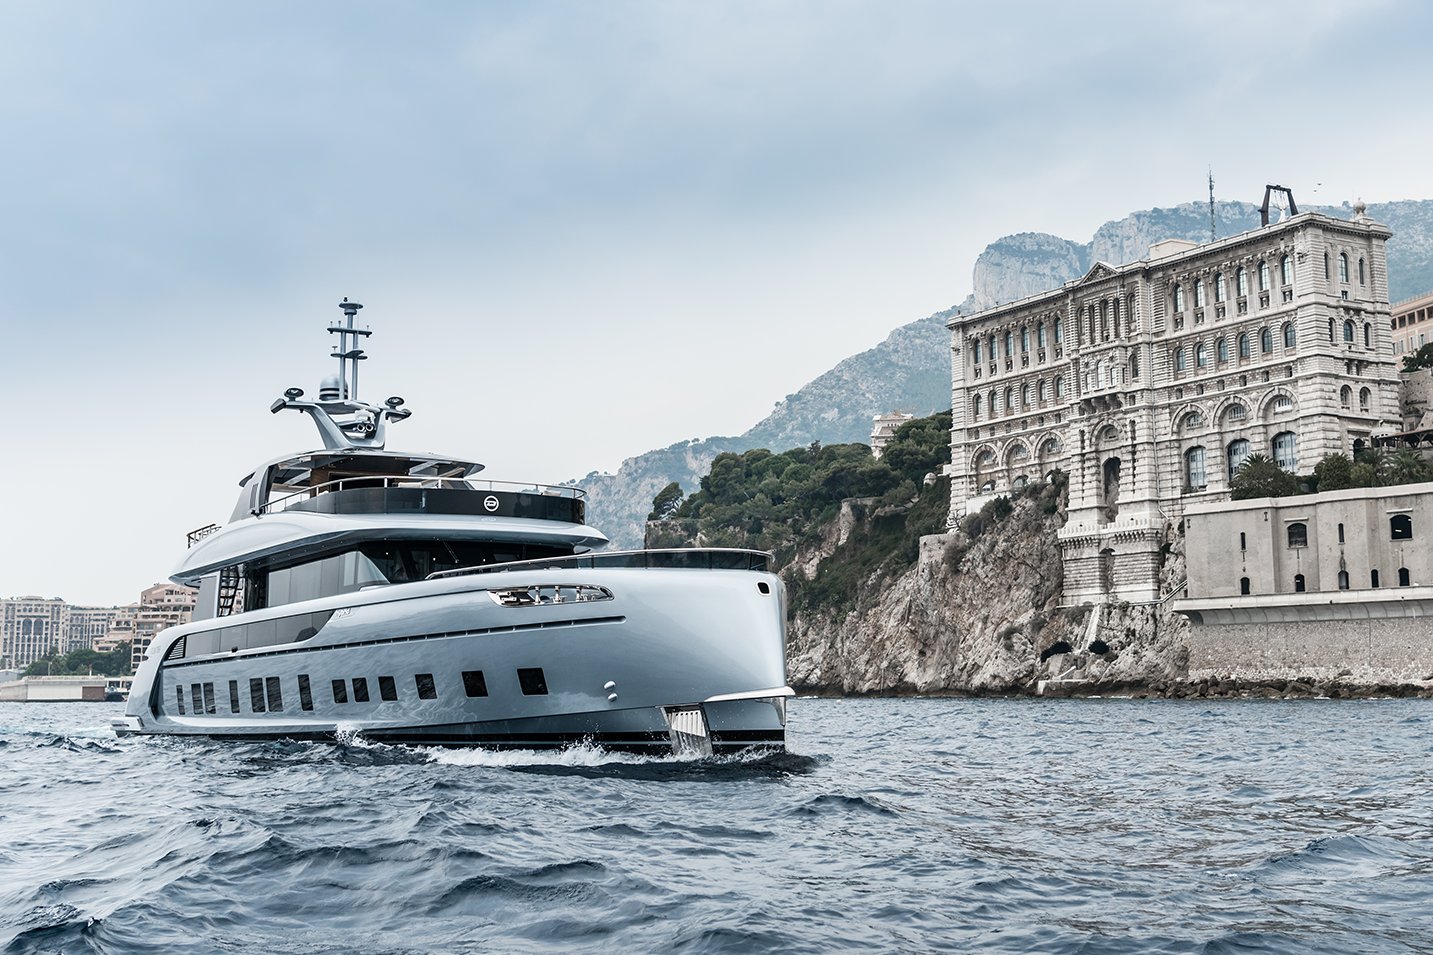 Limited edition superyacht designed by Porsche hits the market in Italy